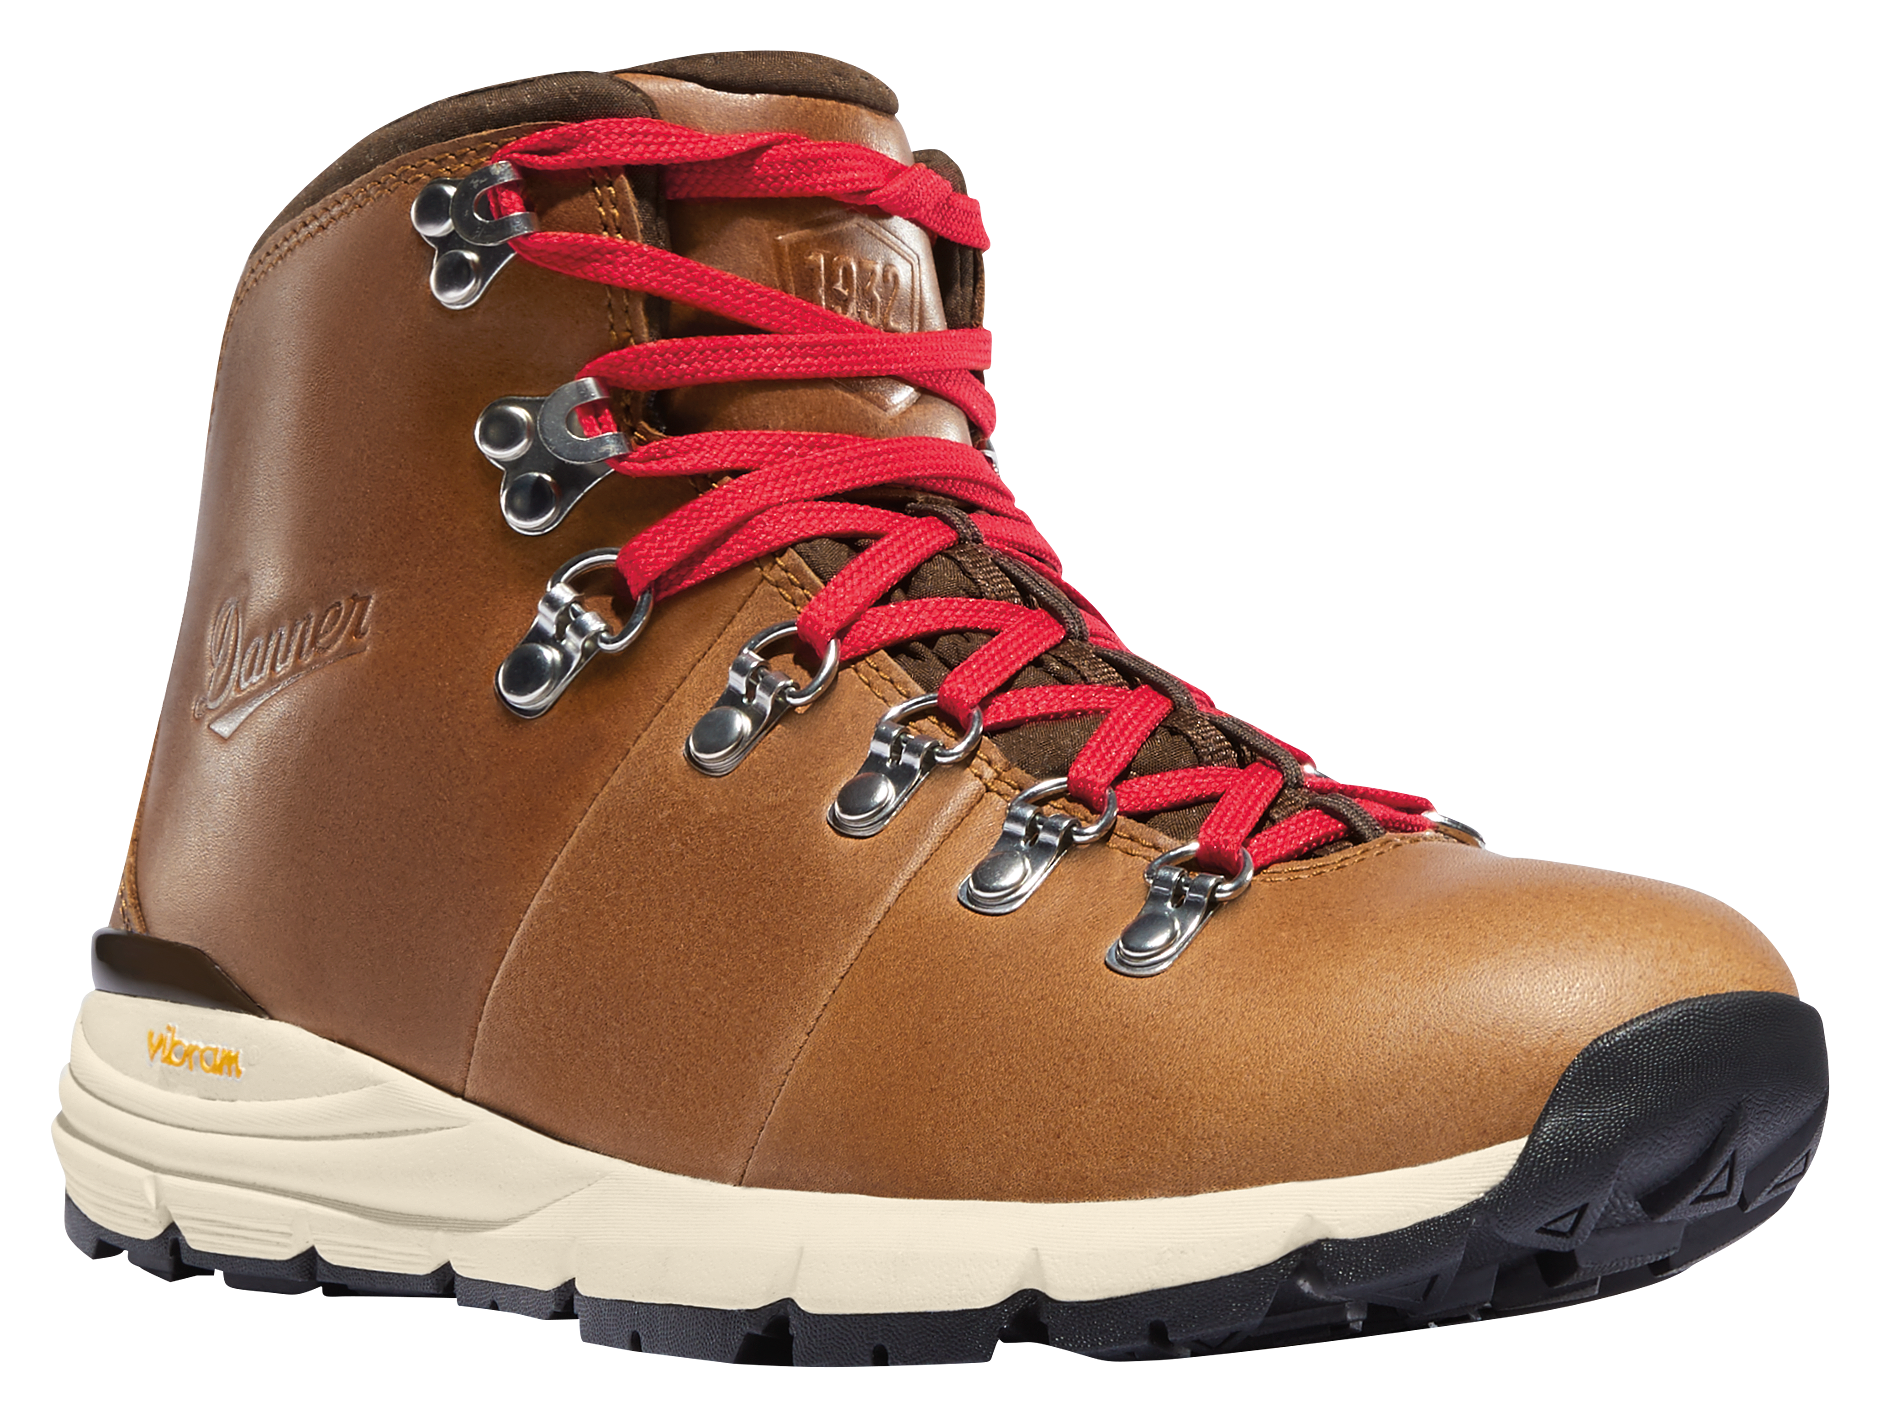 Danner Mountain 600 Leather Waterproof Hiking Boots for Ladies - Saddle Tan - 9.5M